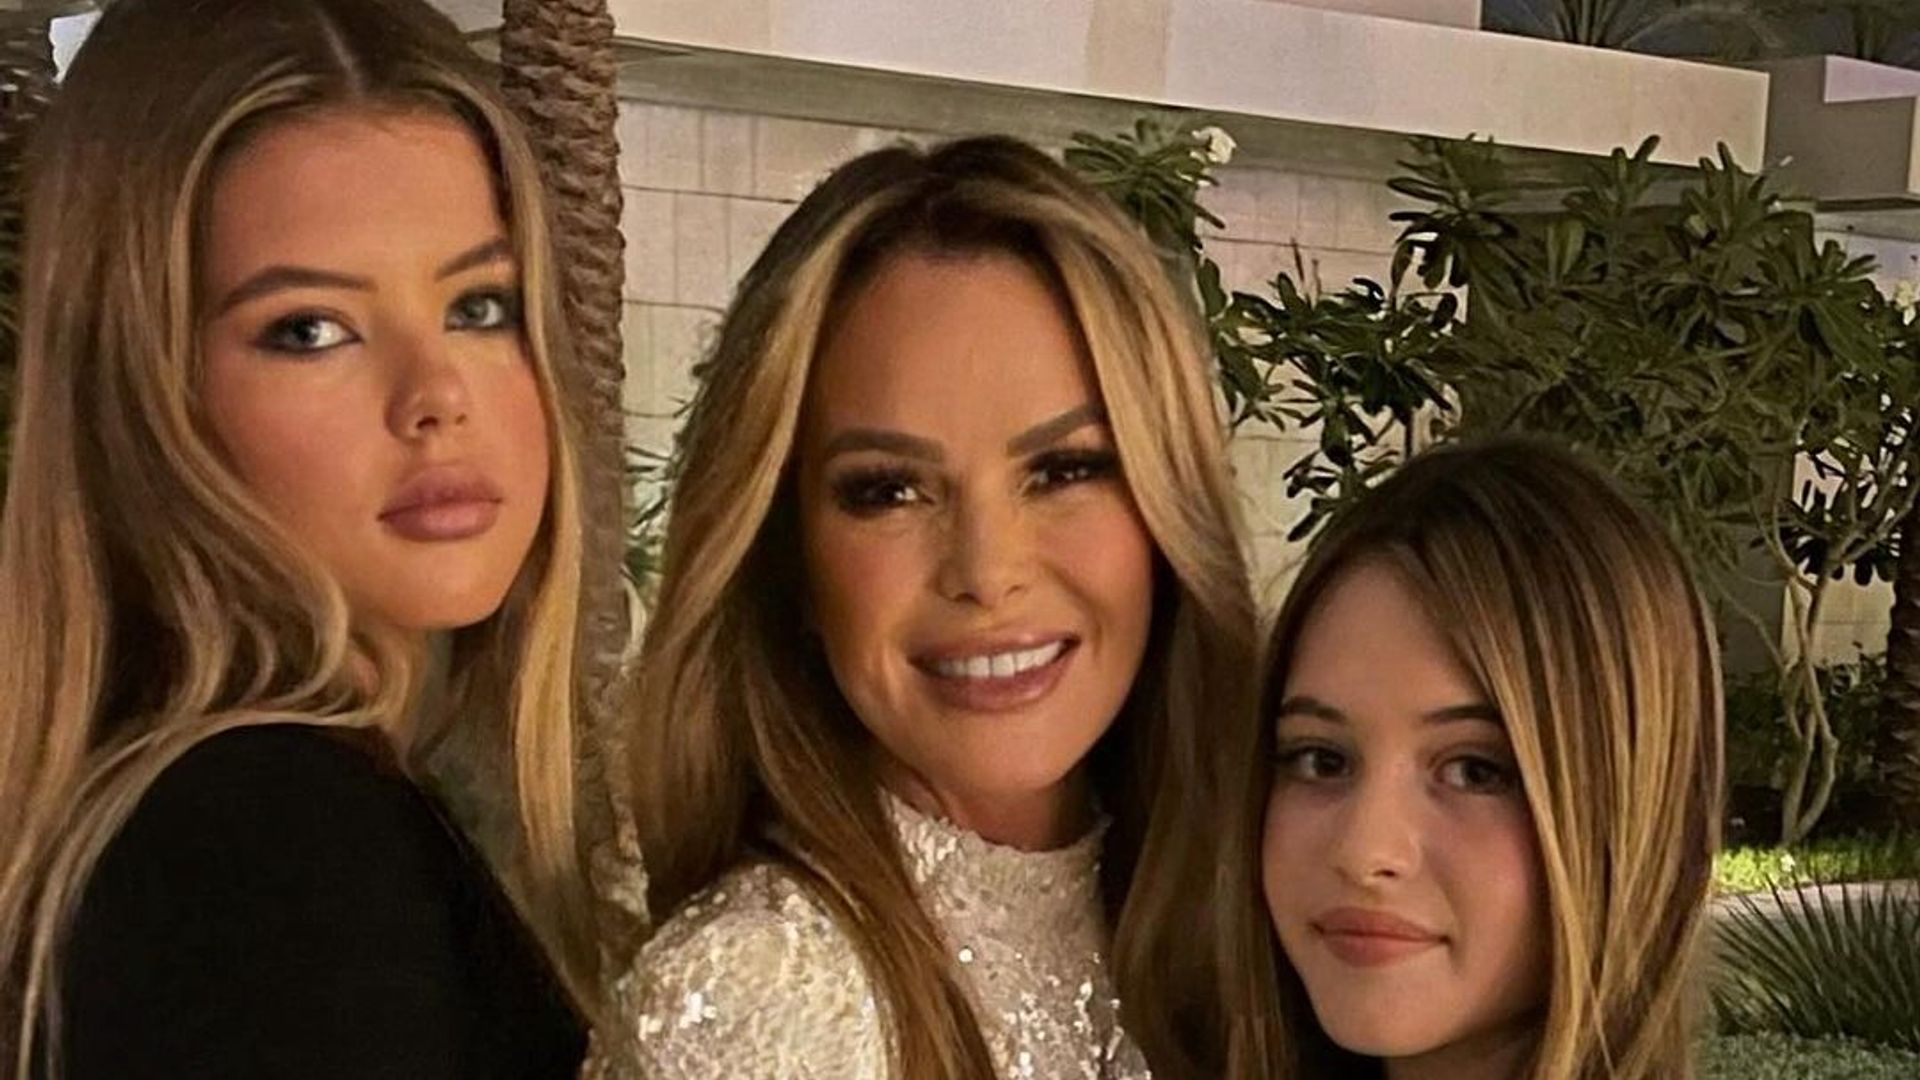 Amanda Holden with her daughters, Lexi and Hollie